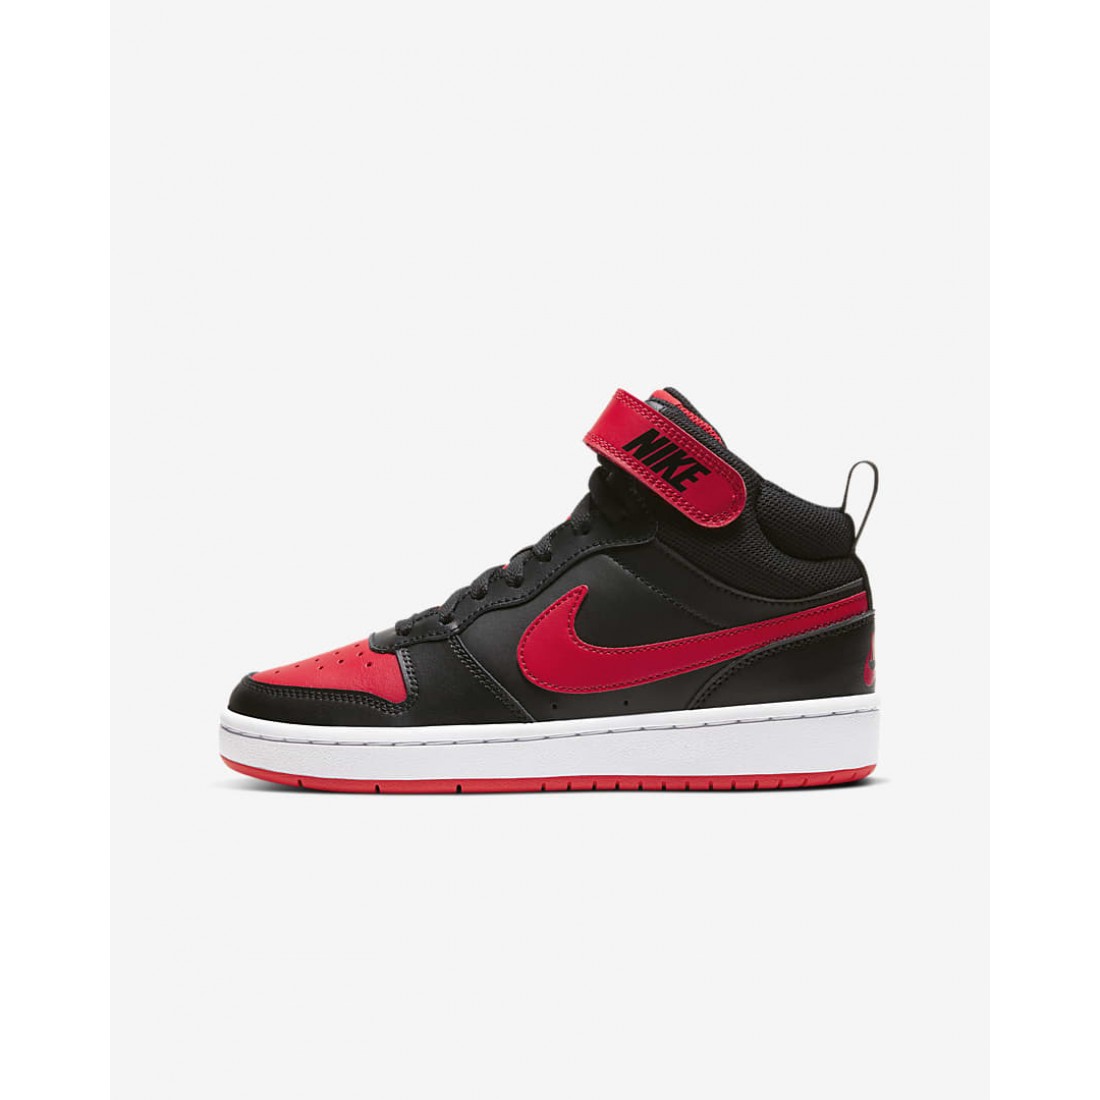 Buy online Cheap Nike Court Borough Mid 2 Shoes | Nike Sale Outlet - Up ...